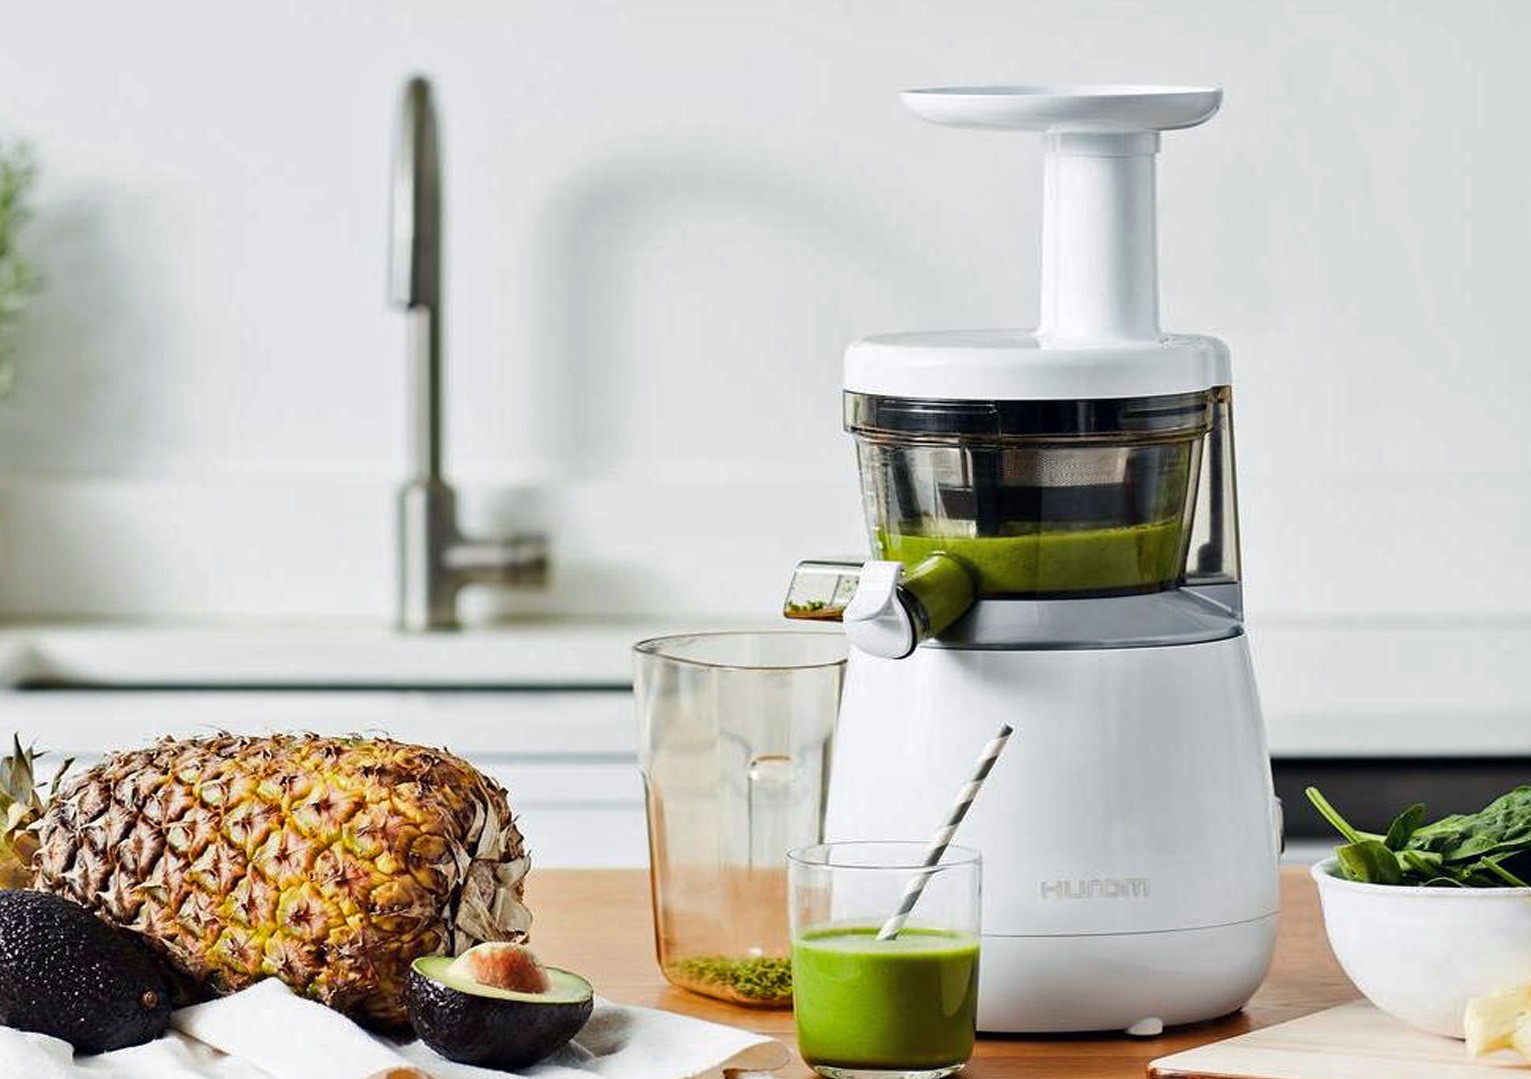 Hurom HP Slow Juicer review